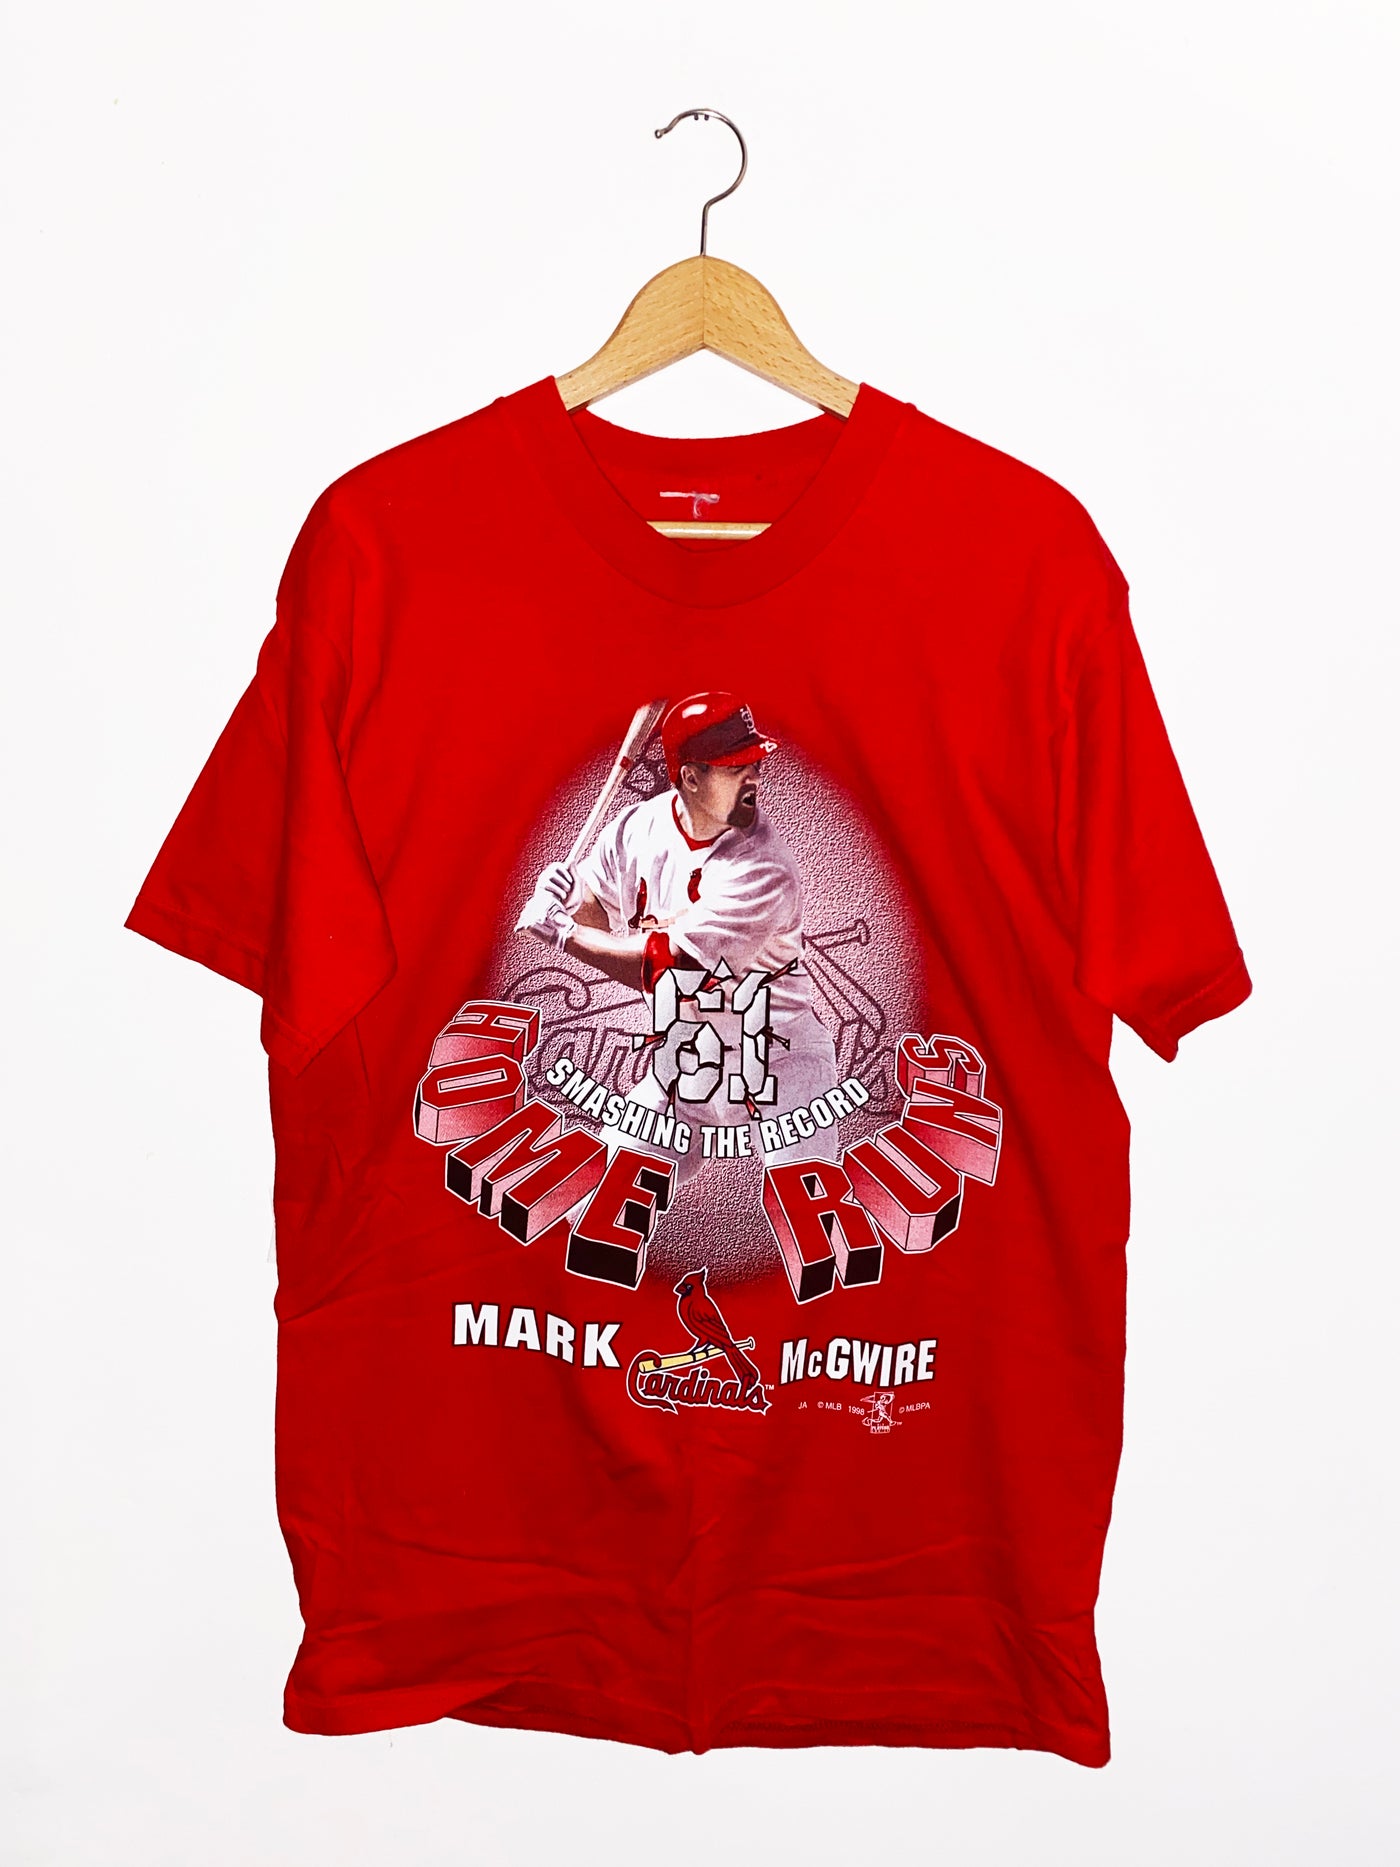 Vintage 1998 Mark Mcguire St. Louis Cardinals “Smashing the Record” T-Shirt